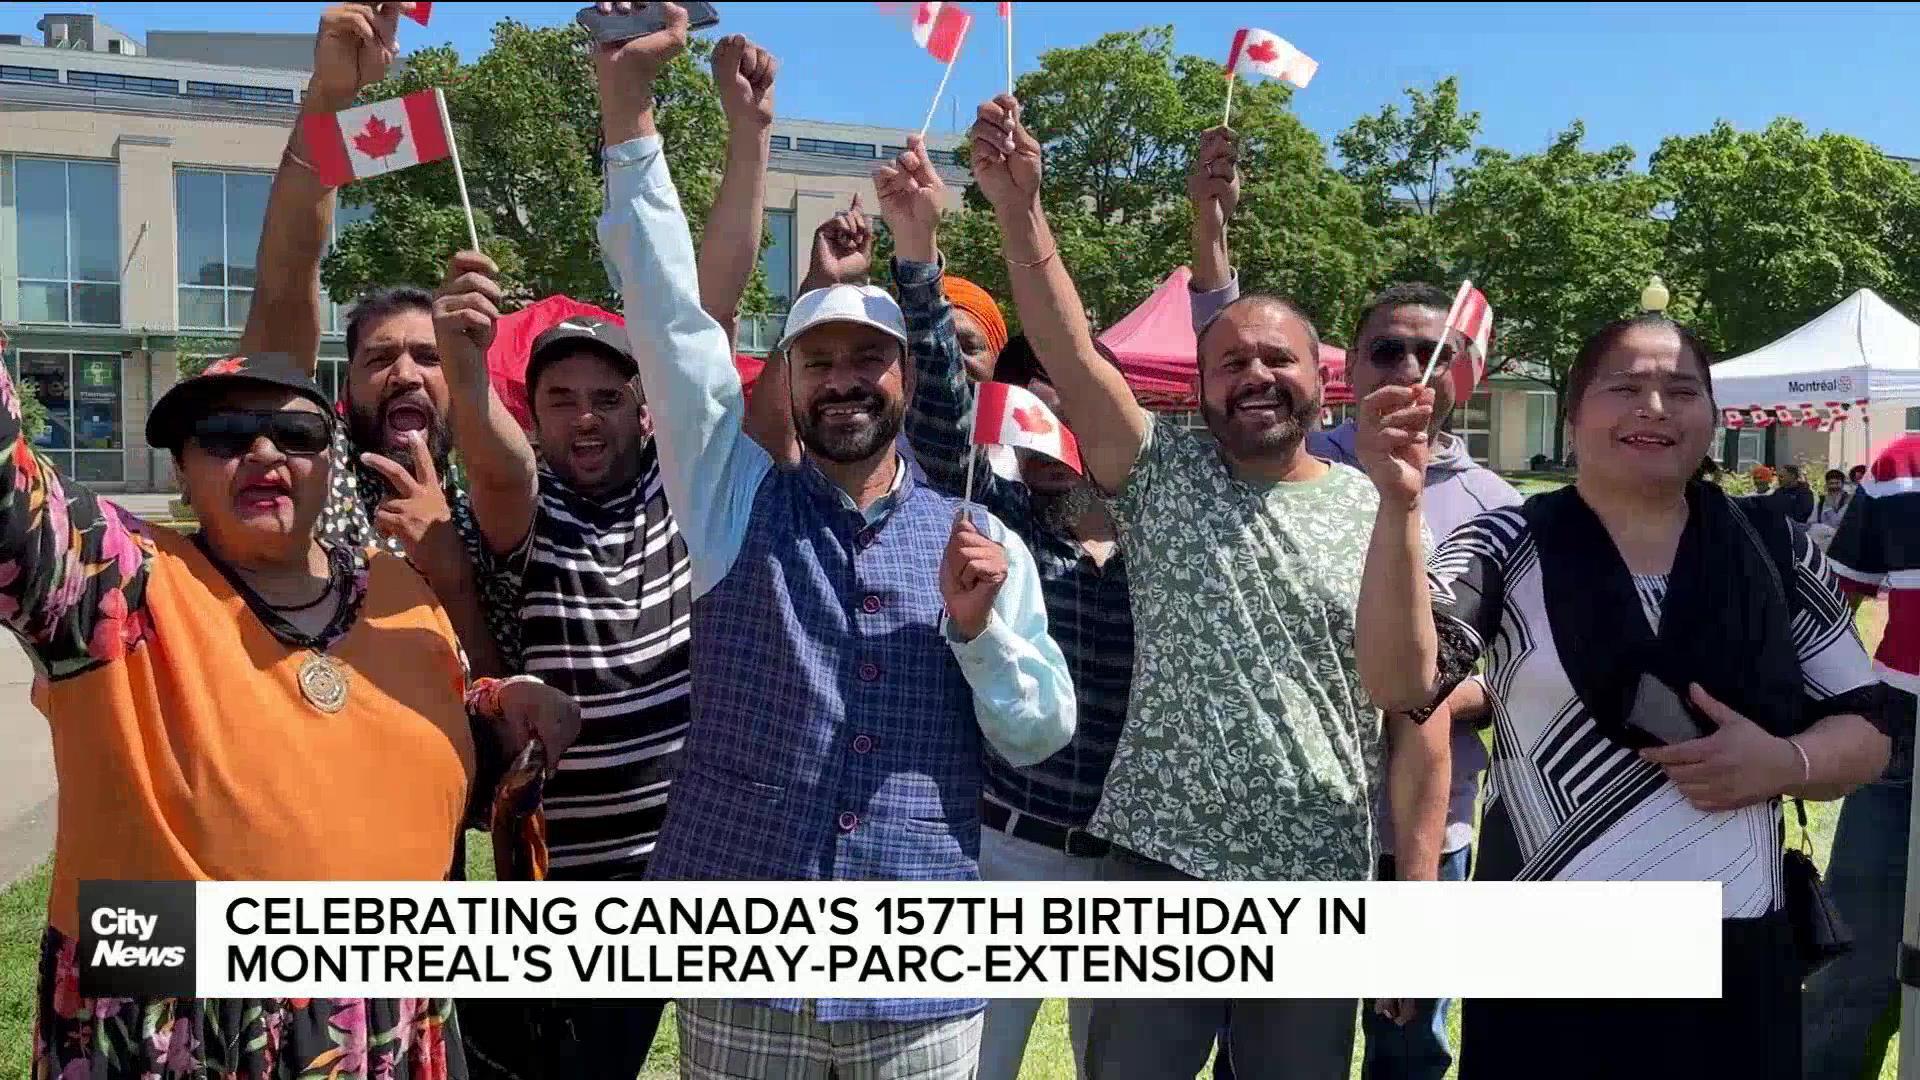 Celebrating Canada’s 157th birthday in Villeray-Parc-Extension